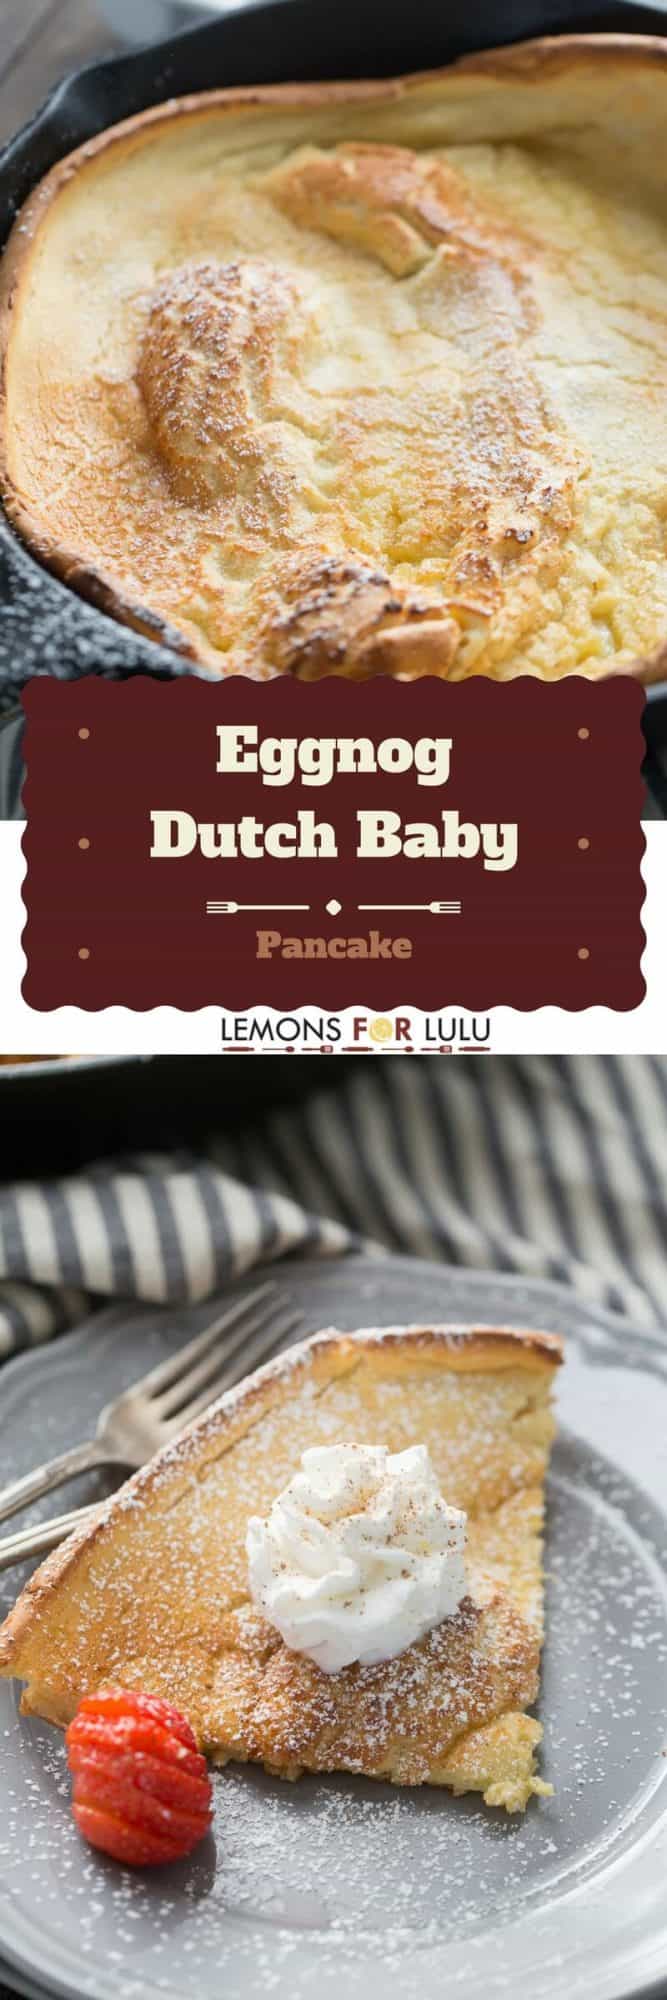 Ready to take breakfast to new heights? This eggnog Dutch baby recipe is so crazy simple, but will wow your family and guests every time!